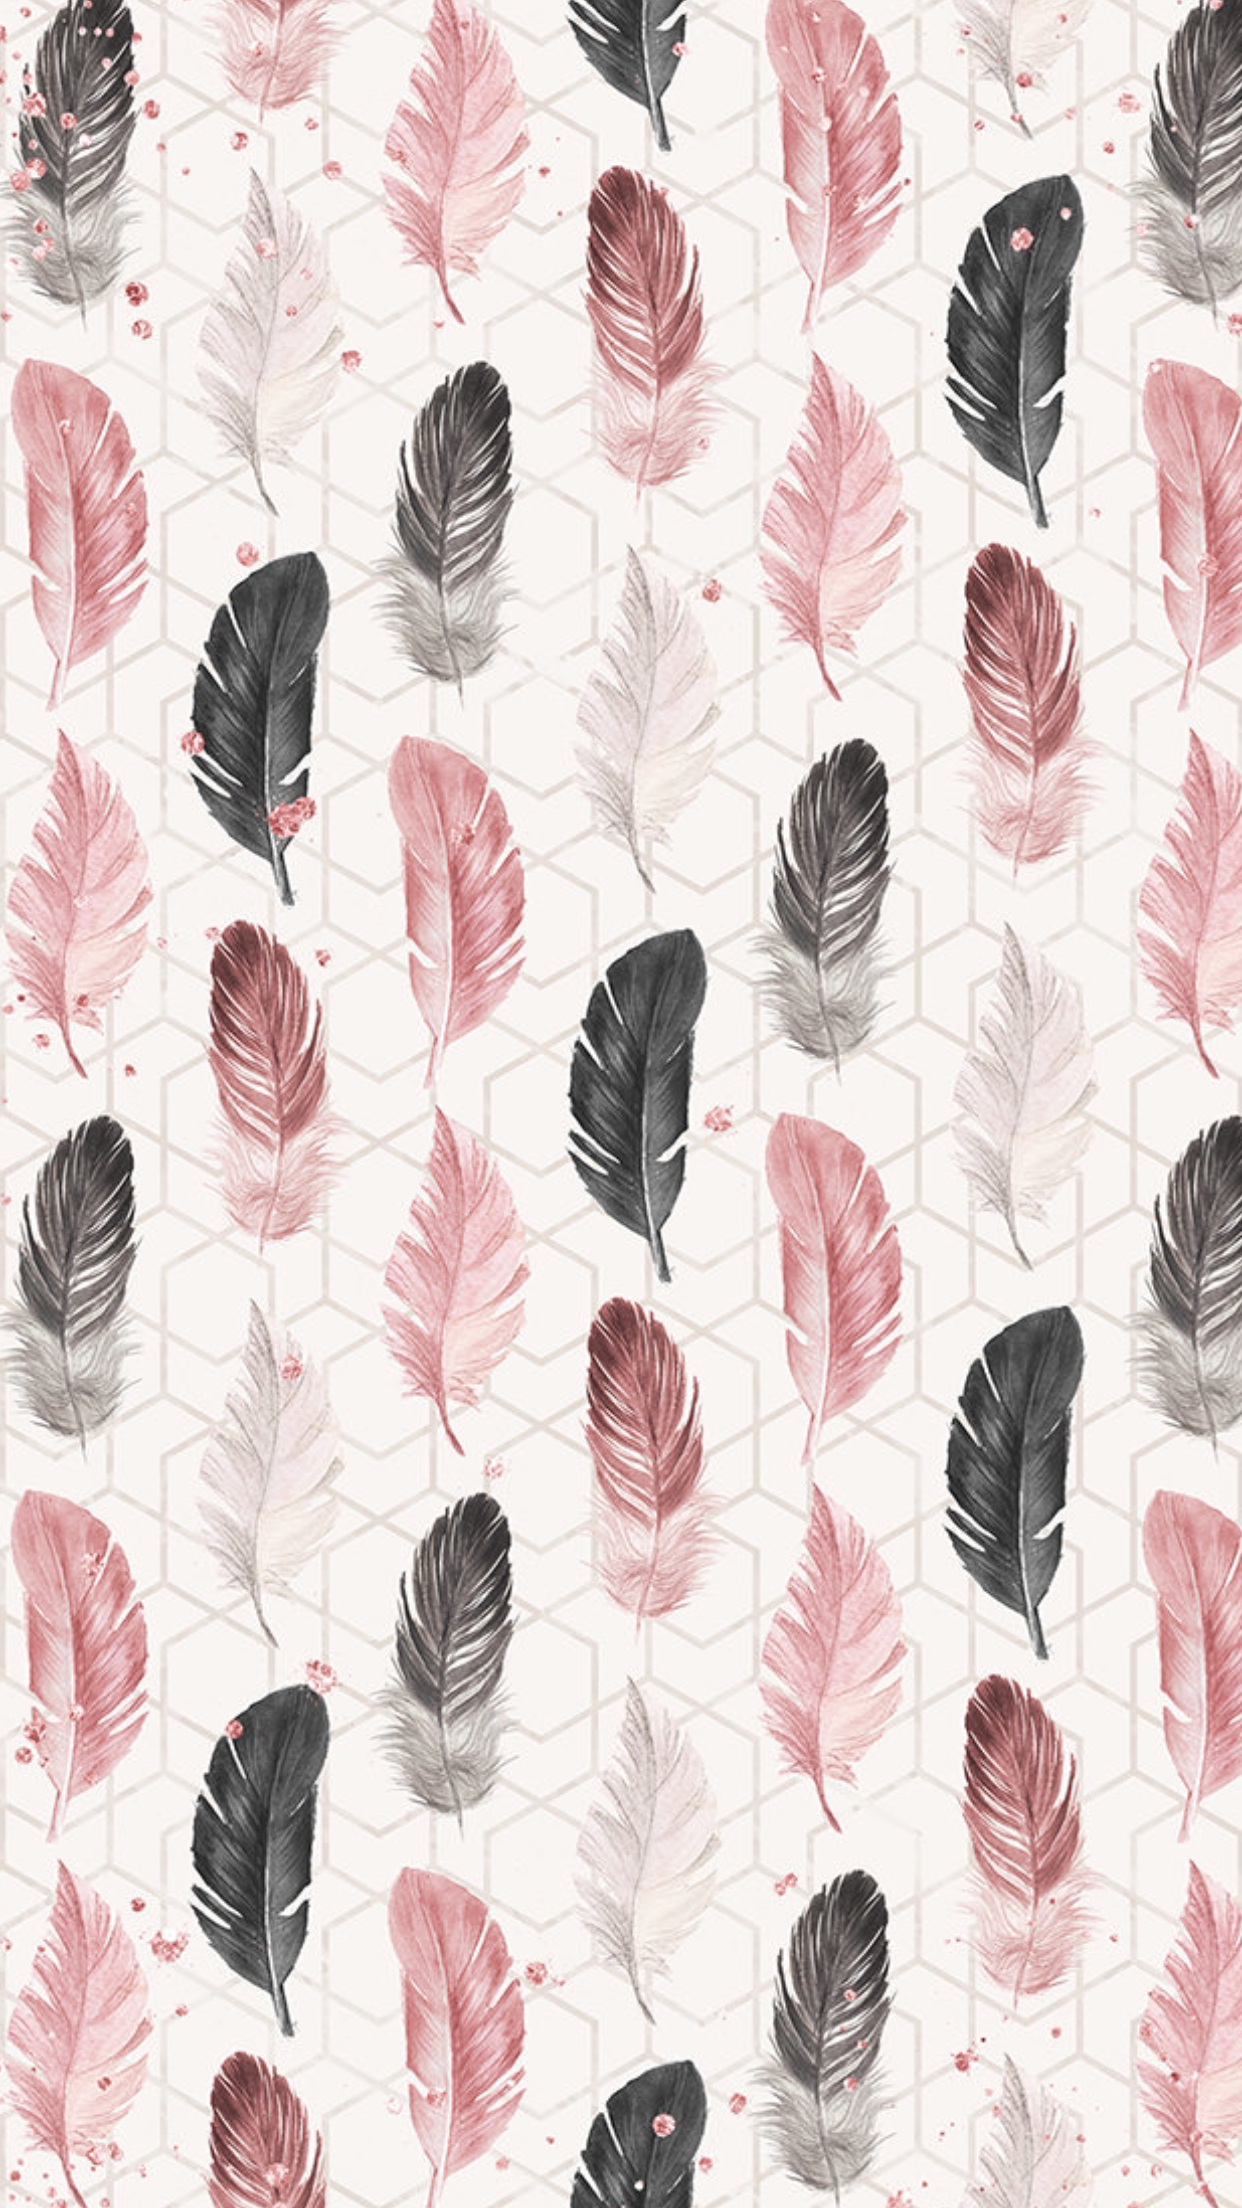 Feather pattern IphoneBackgrounds Girly WALLPAPERS phones